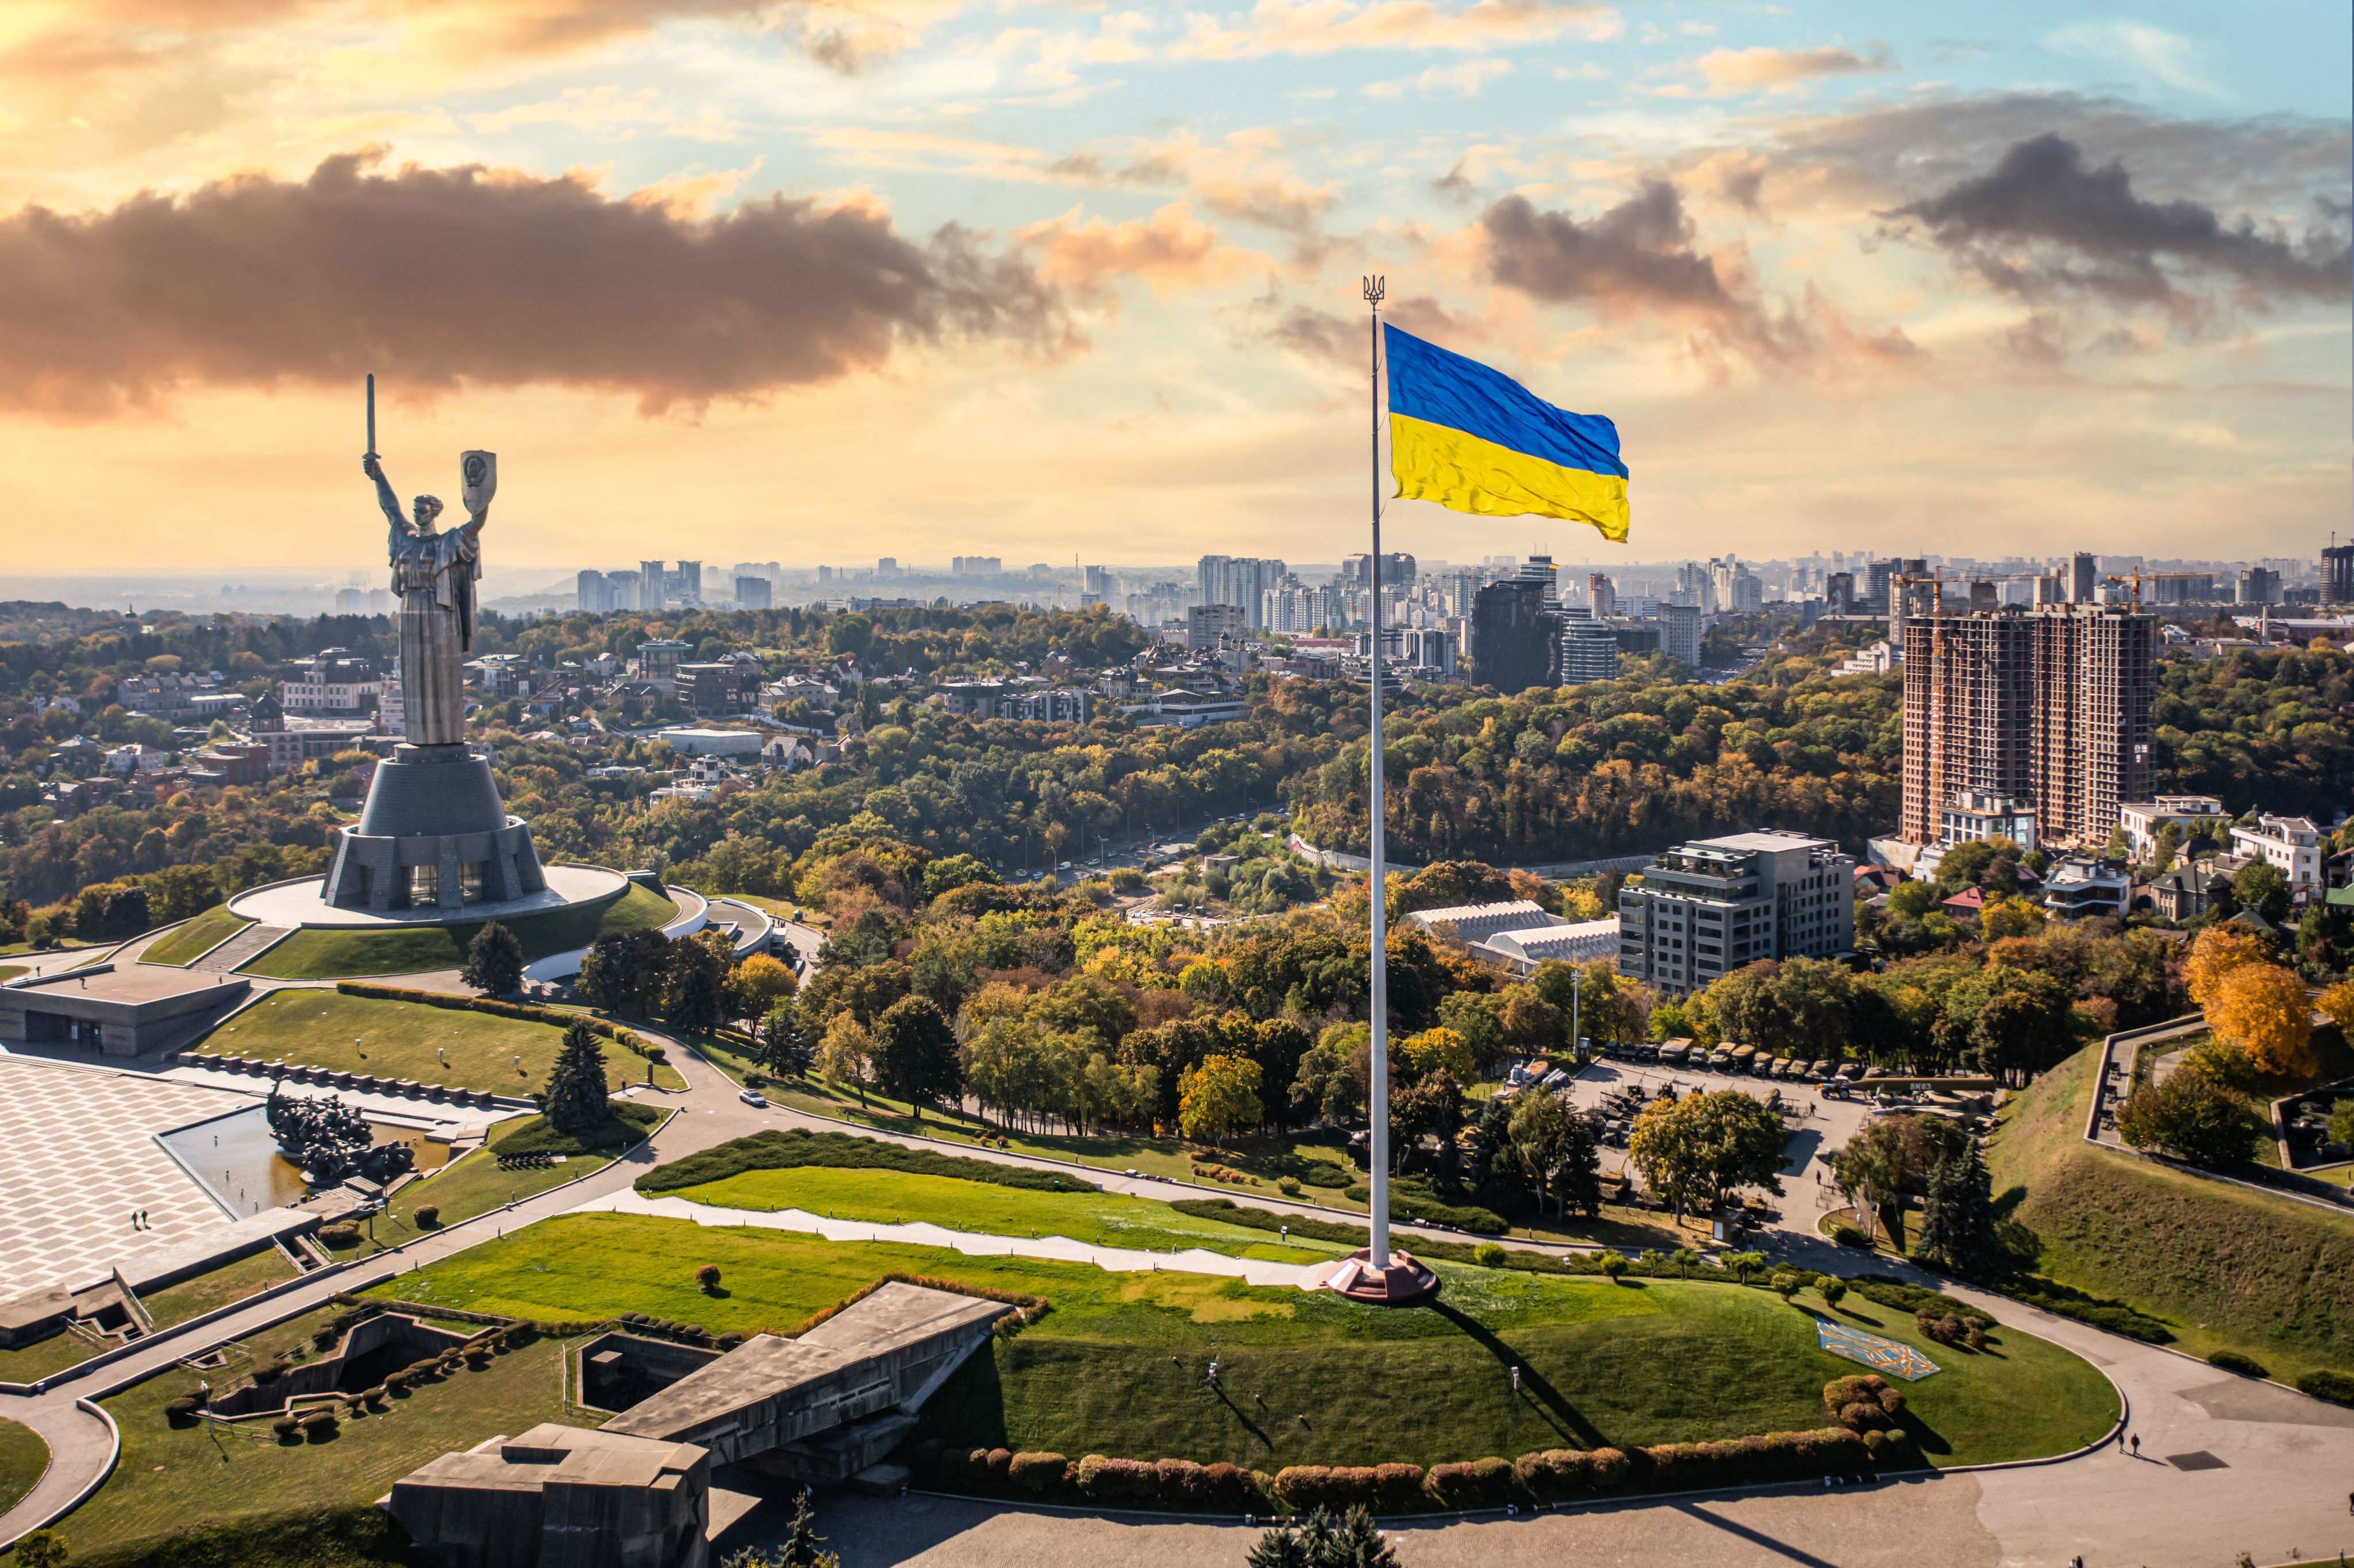 View of Kyiv including Ukrainian flag and Motherland statue